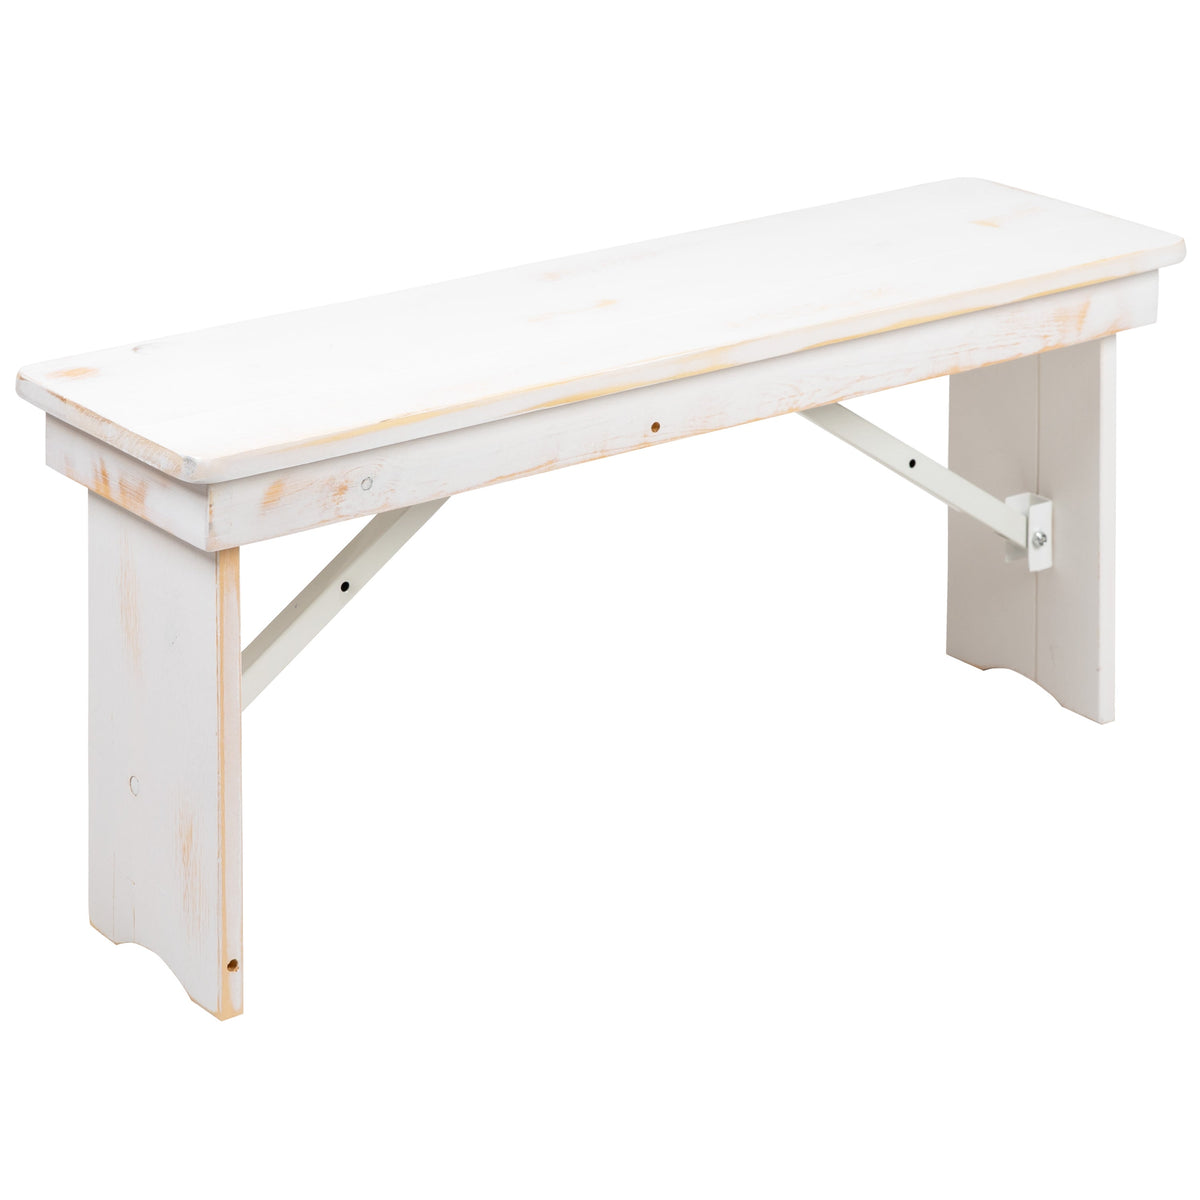 Antique Rustic White |#| 40inch x 12inch Antique Rustic White Solid Pine Folding Farm Bench - Portable Bench